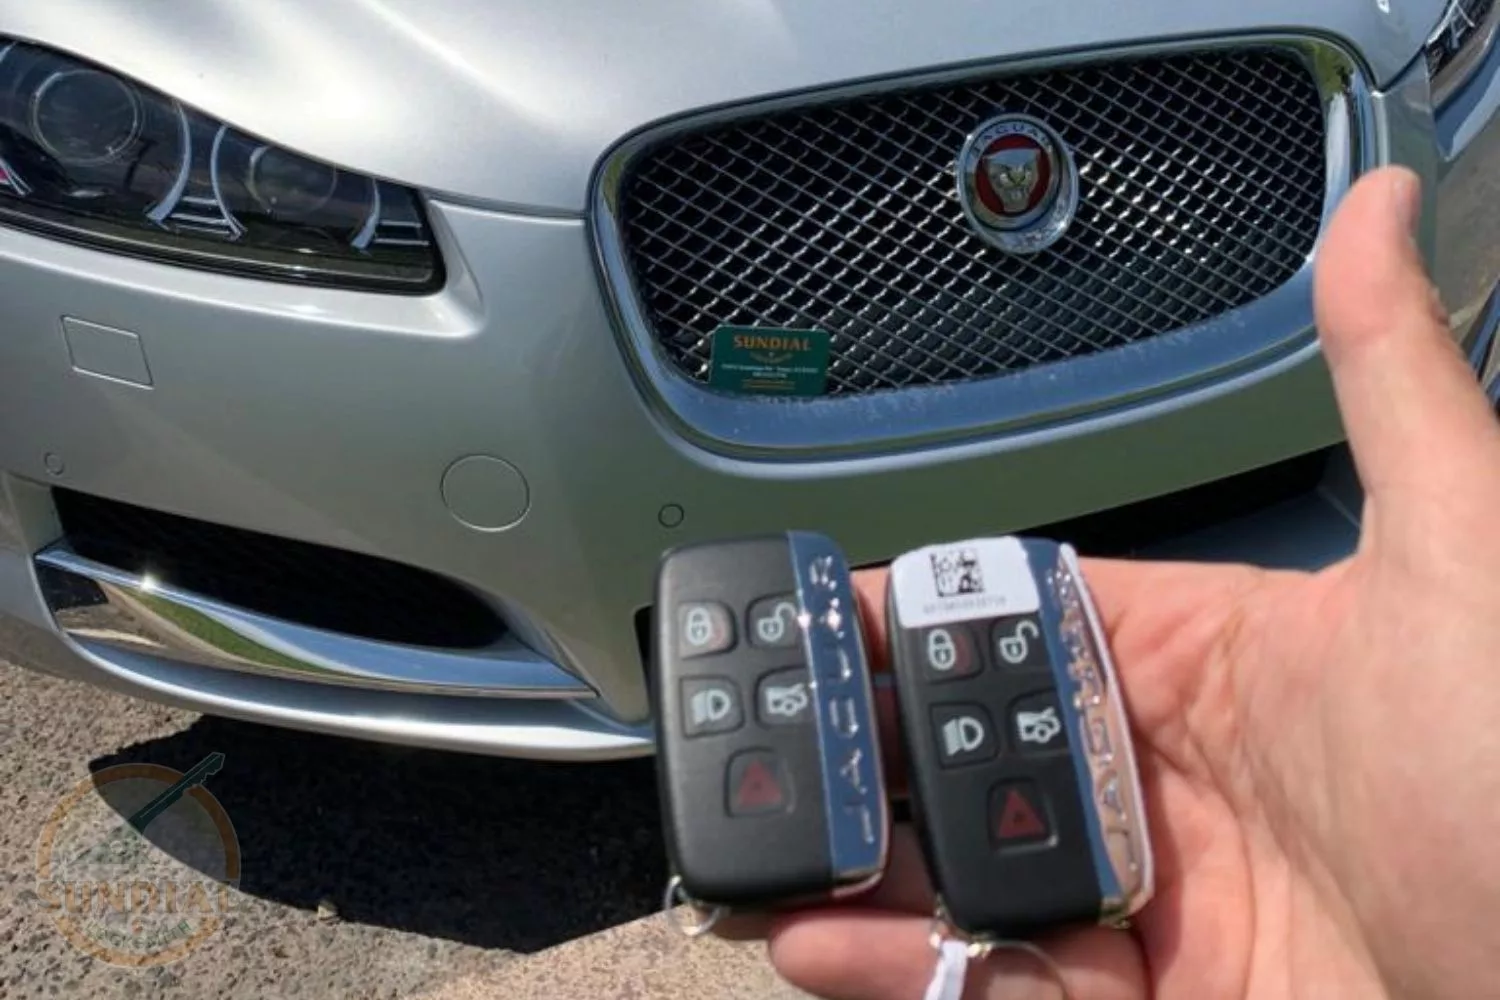 Hand holding two Jaguar key fobs in front of a silver Jaguar vehicle's front grille and headlight, with a 'SUNDIAL' business card placed on the grille